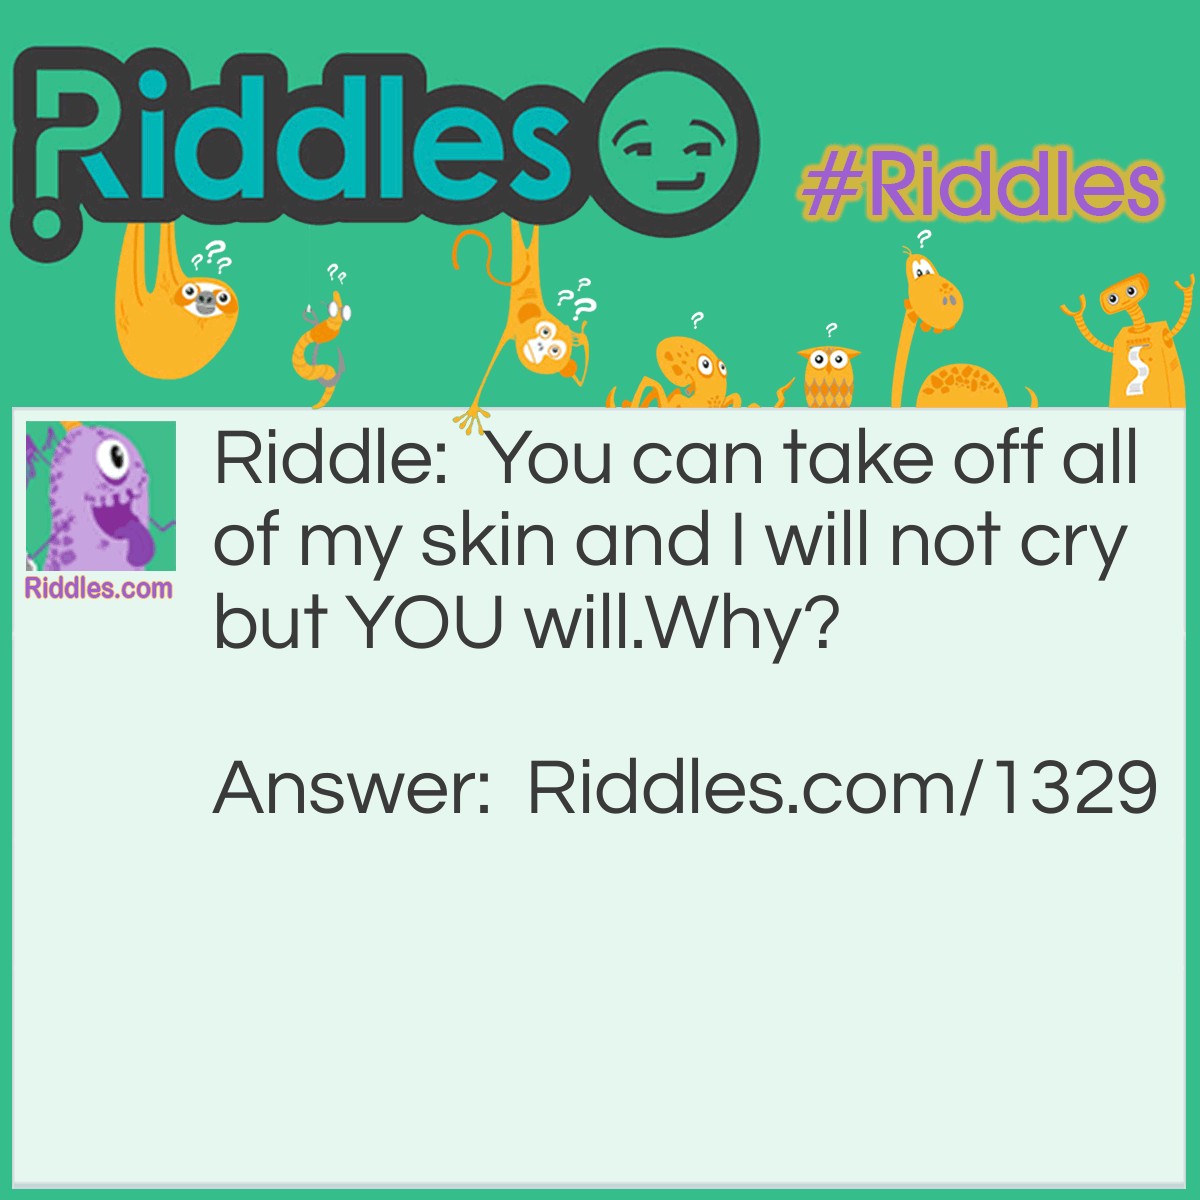 Riddle: You can take off all of my skin and I will not cry but you will. What am I? Answer: I'm an onion.